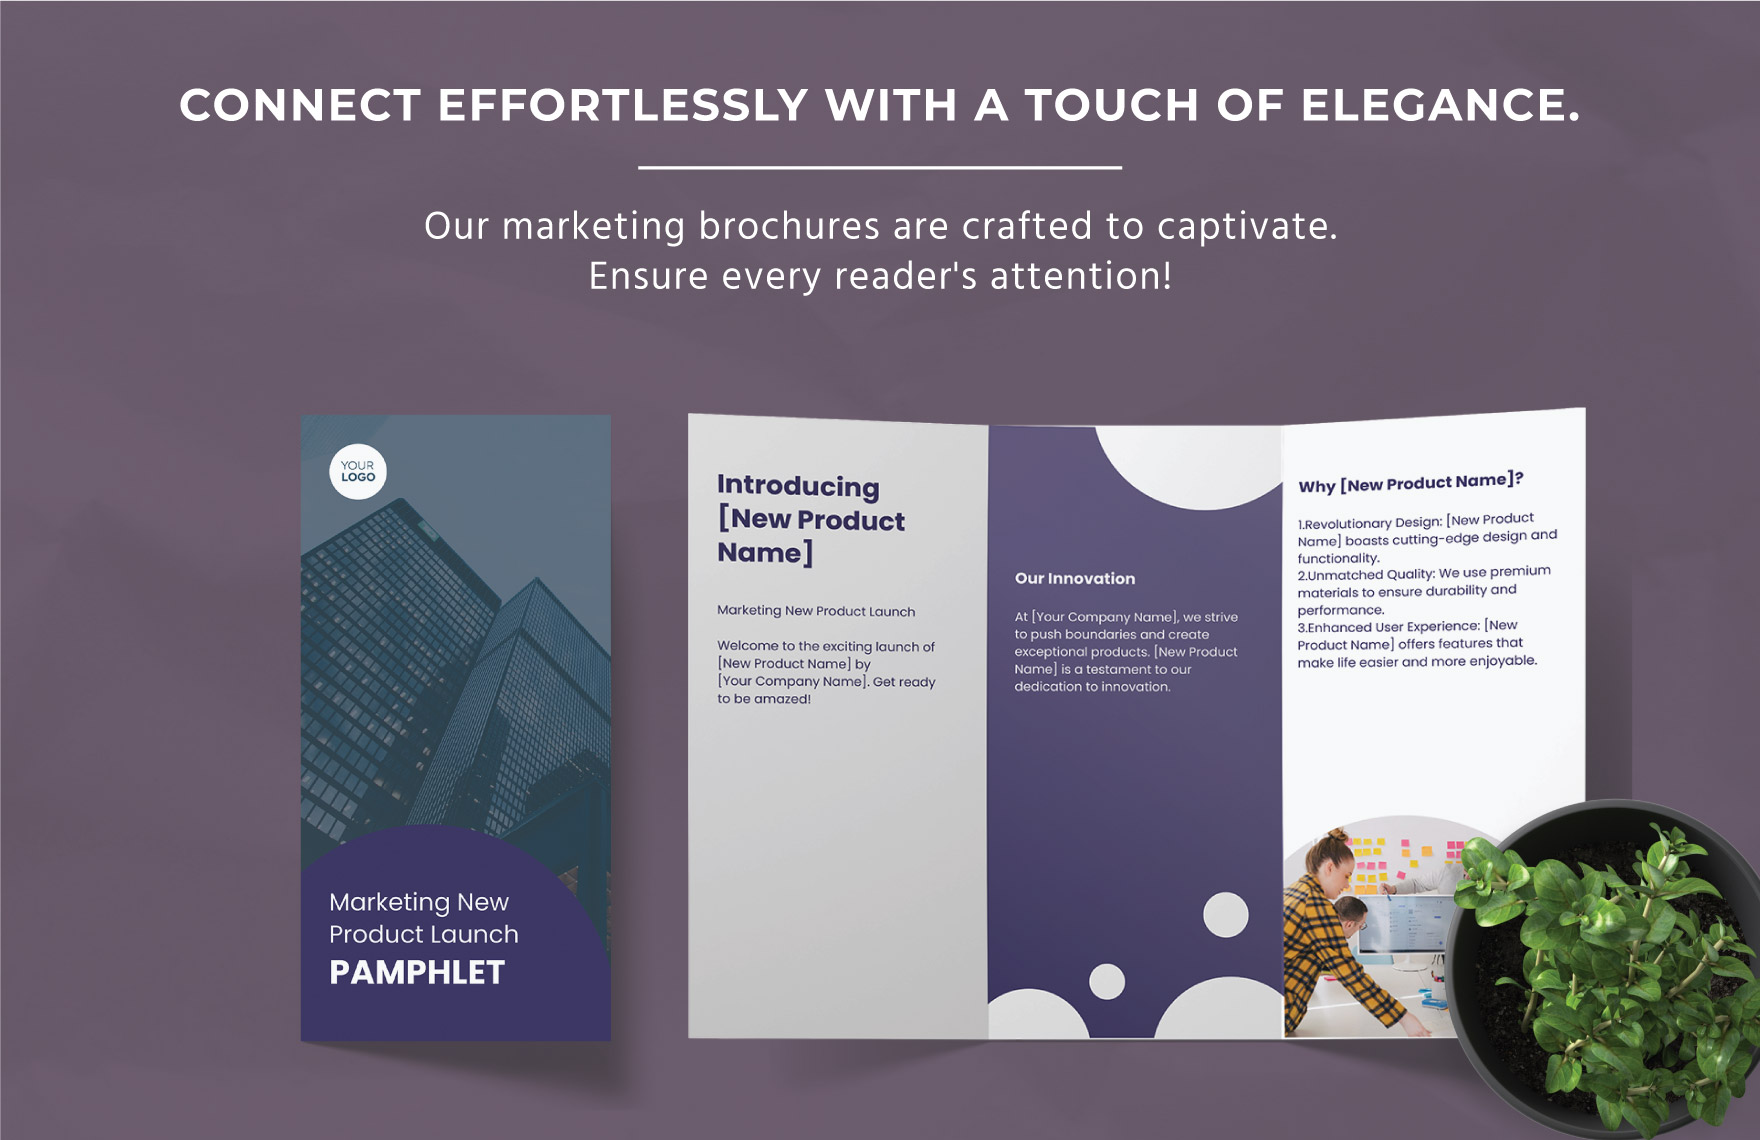 Marketing New Product Launch Pamphlet Template